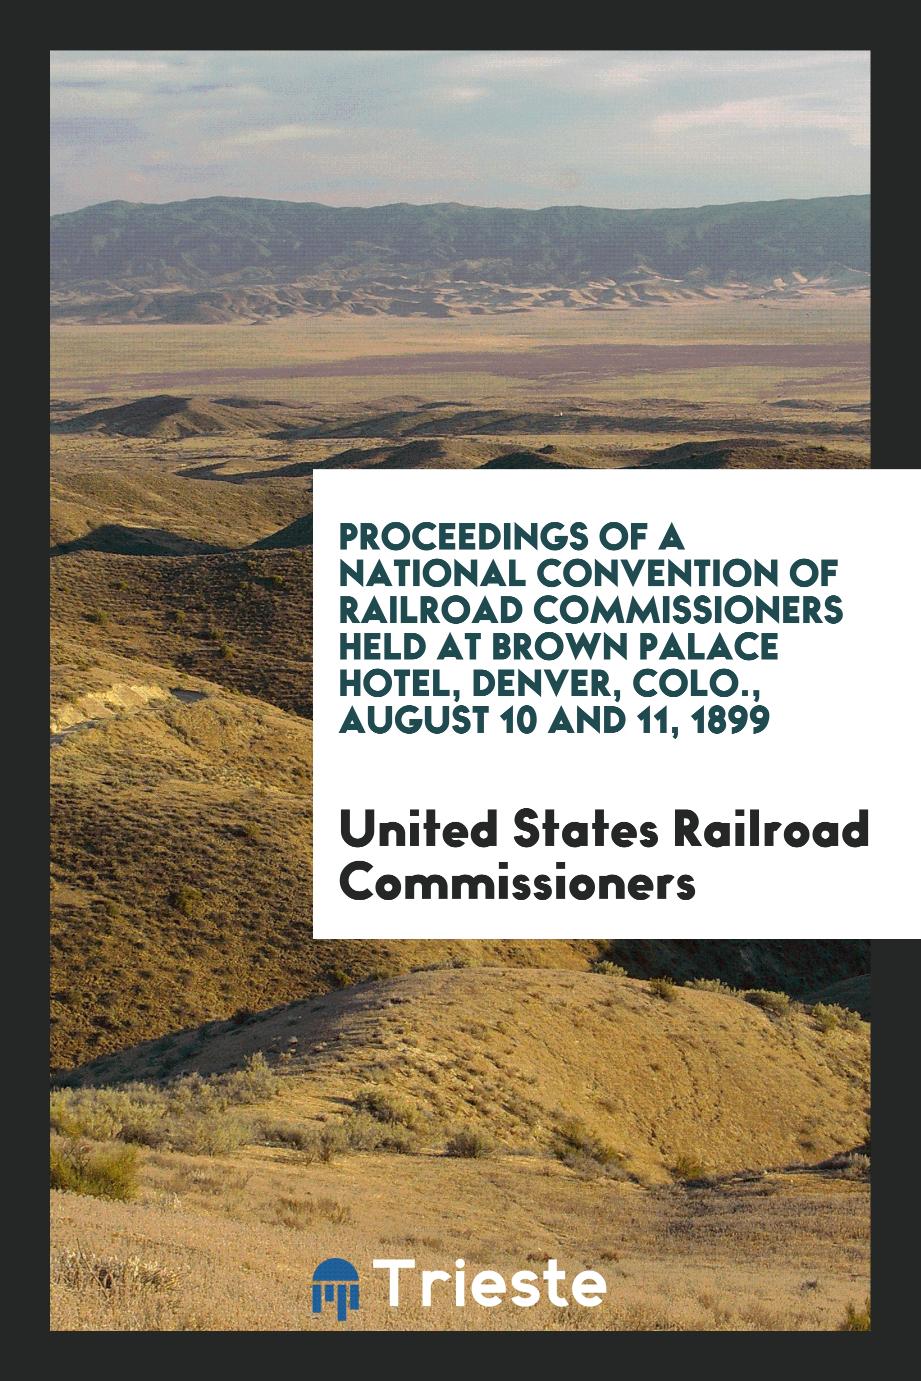 Proceedings of a National Convention of Railroad Commissioners Held at Brown Palace Hotel, Denver, Colo., August 10 and 11, 1899